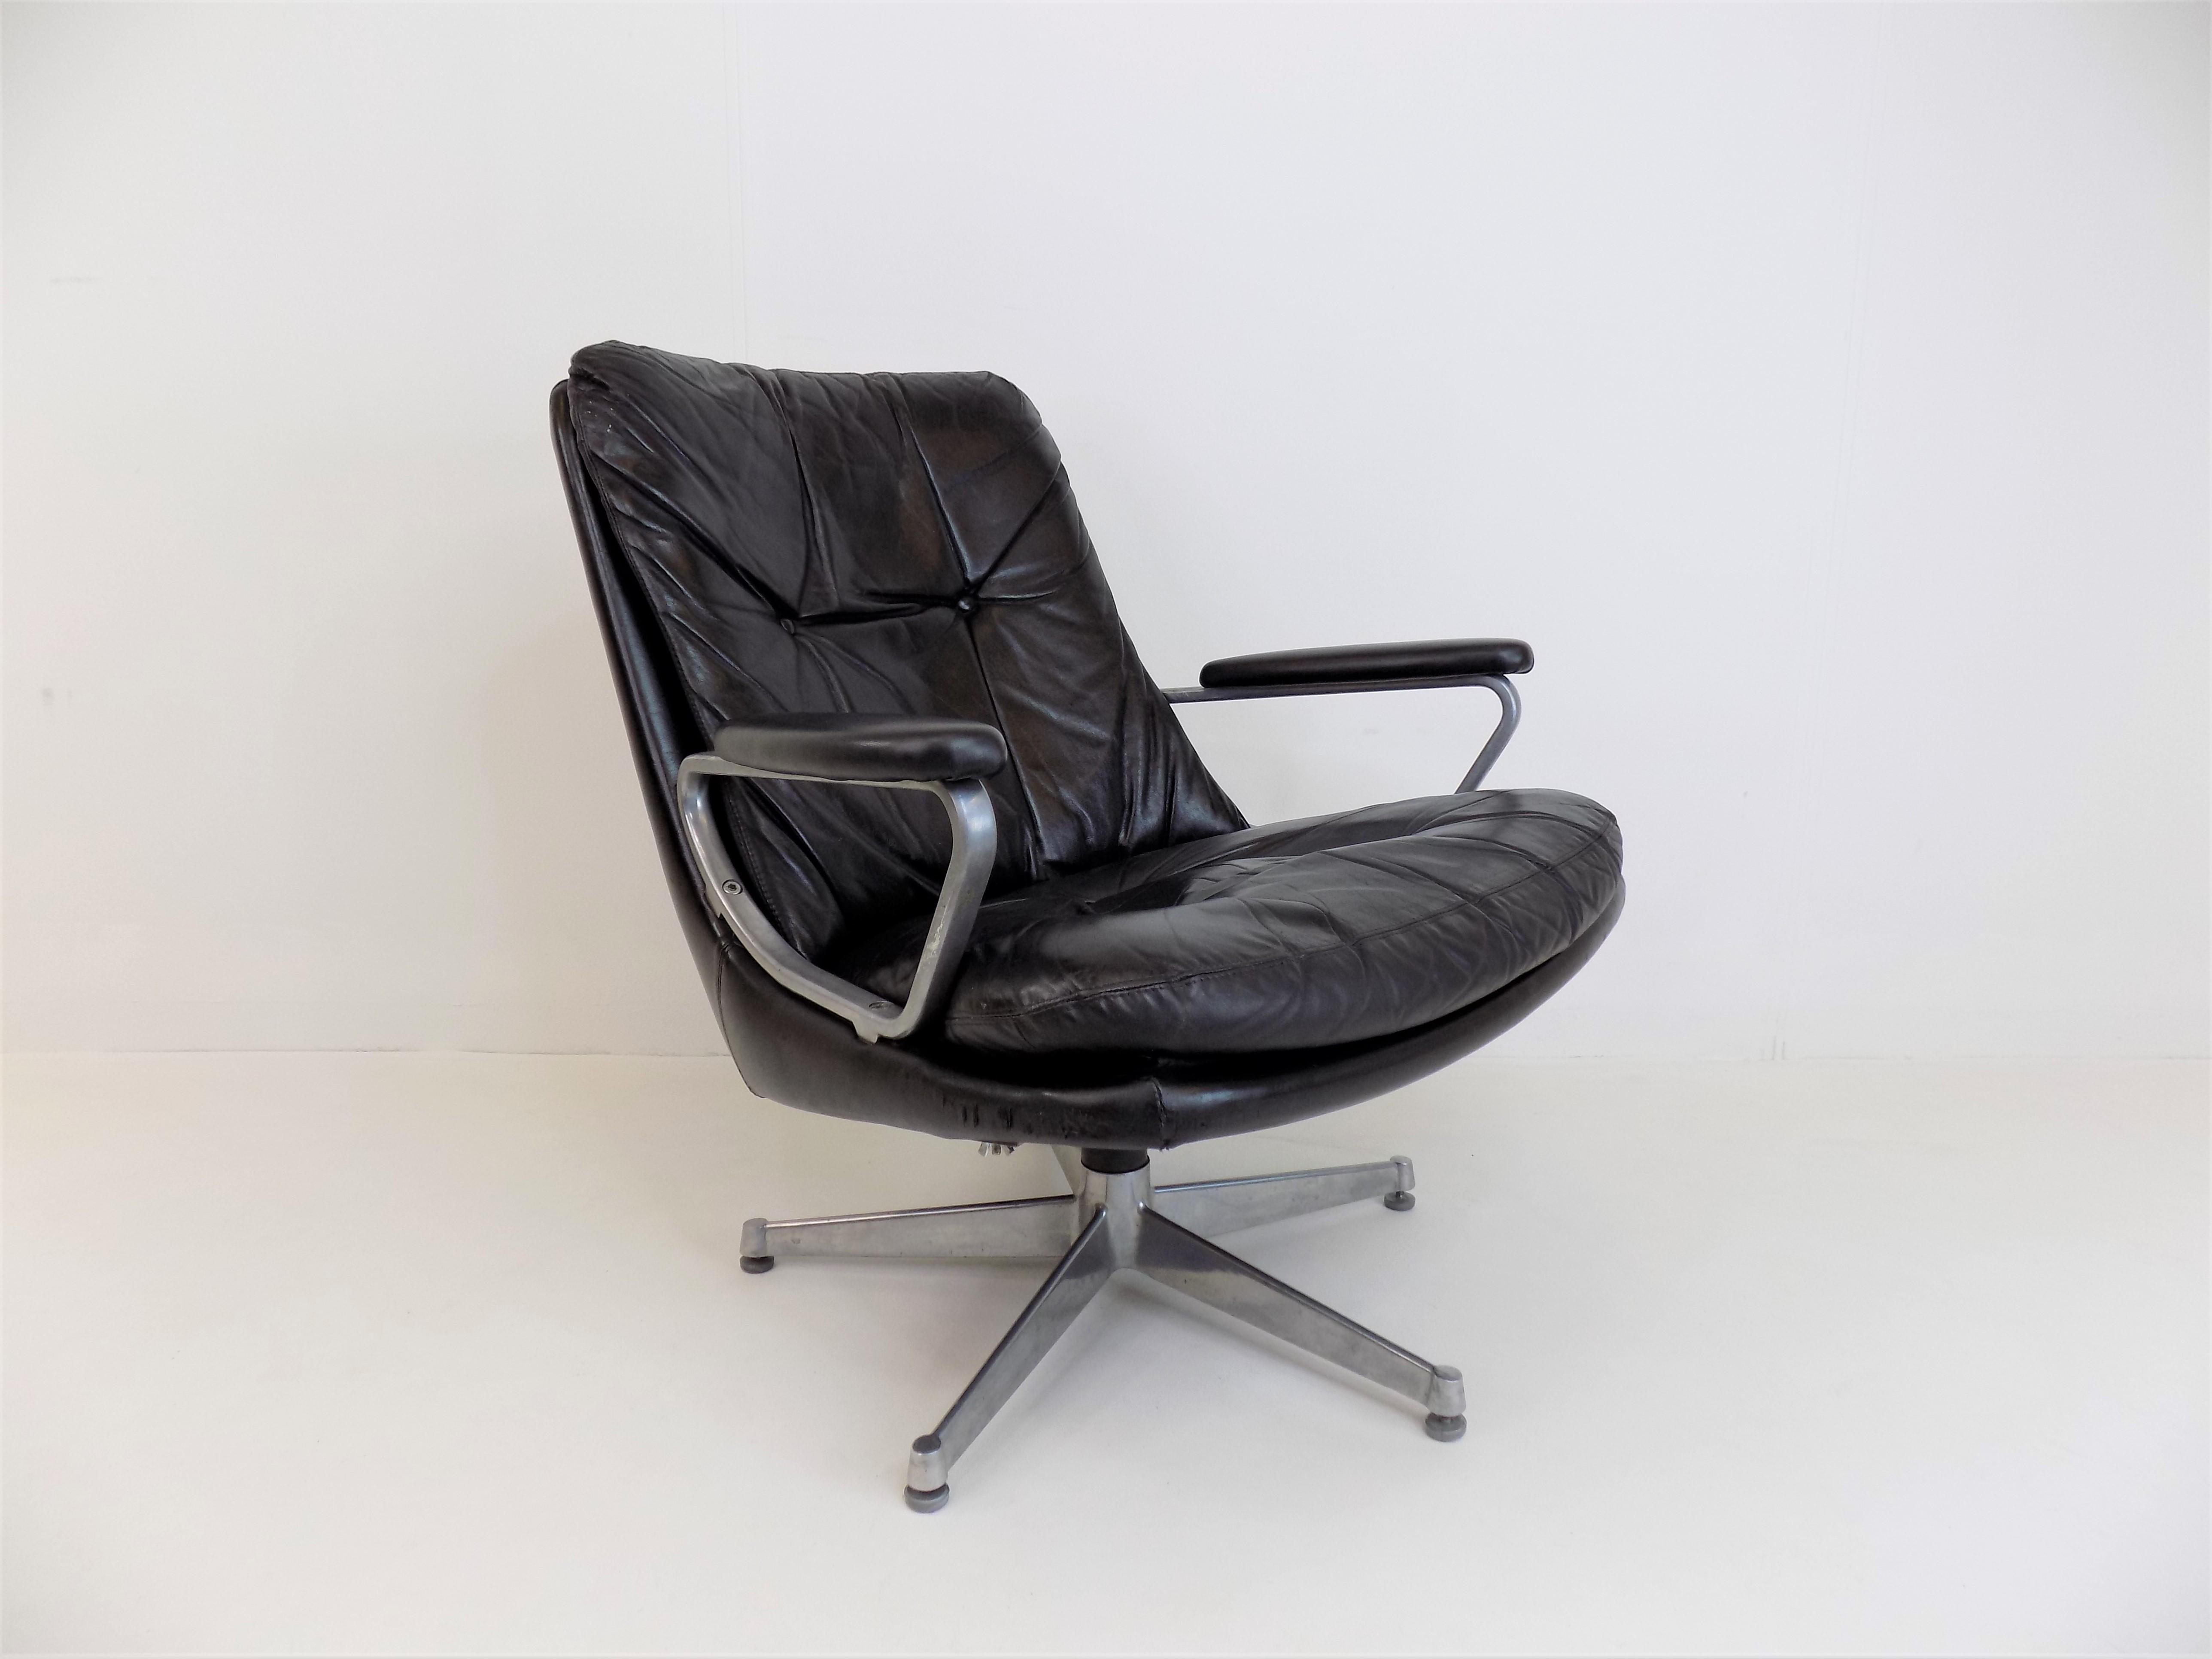 This Gentilina leather armchair in black leather is in good condition. The leather and the stainless steel backrests show minimal signs of wear. The backrest has a slight scratch, the front corners have abrasions. Andre Vandenbeuck designed this